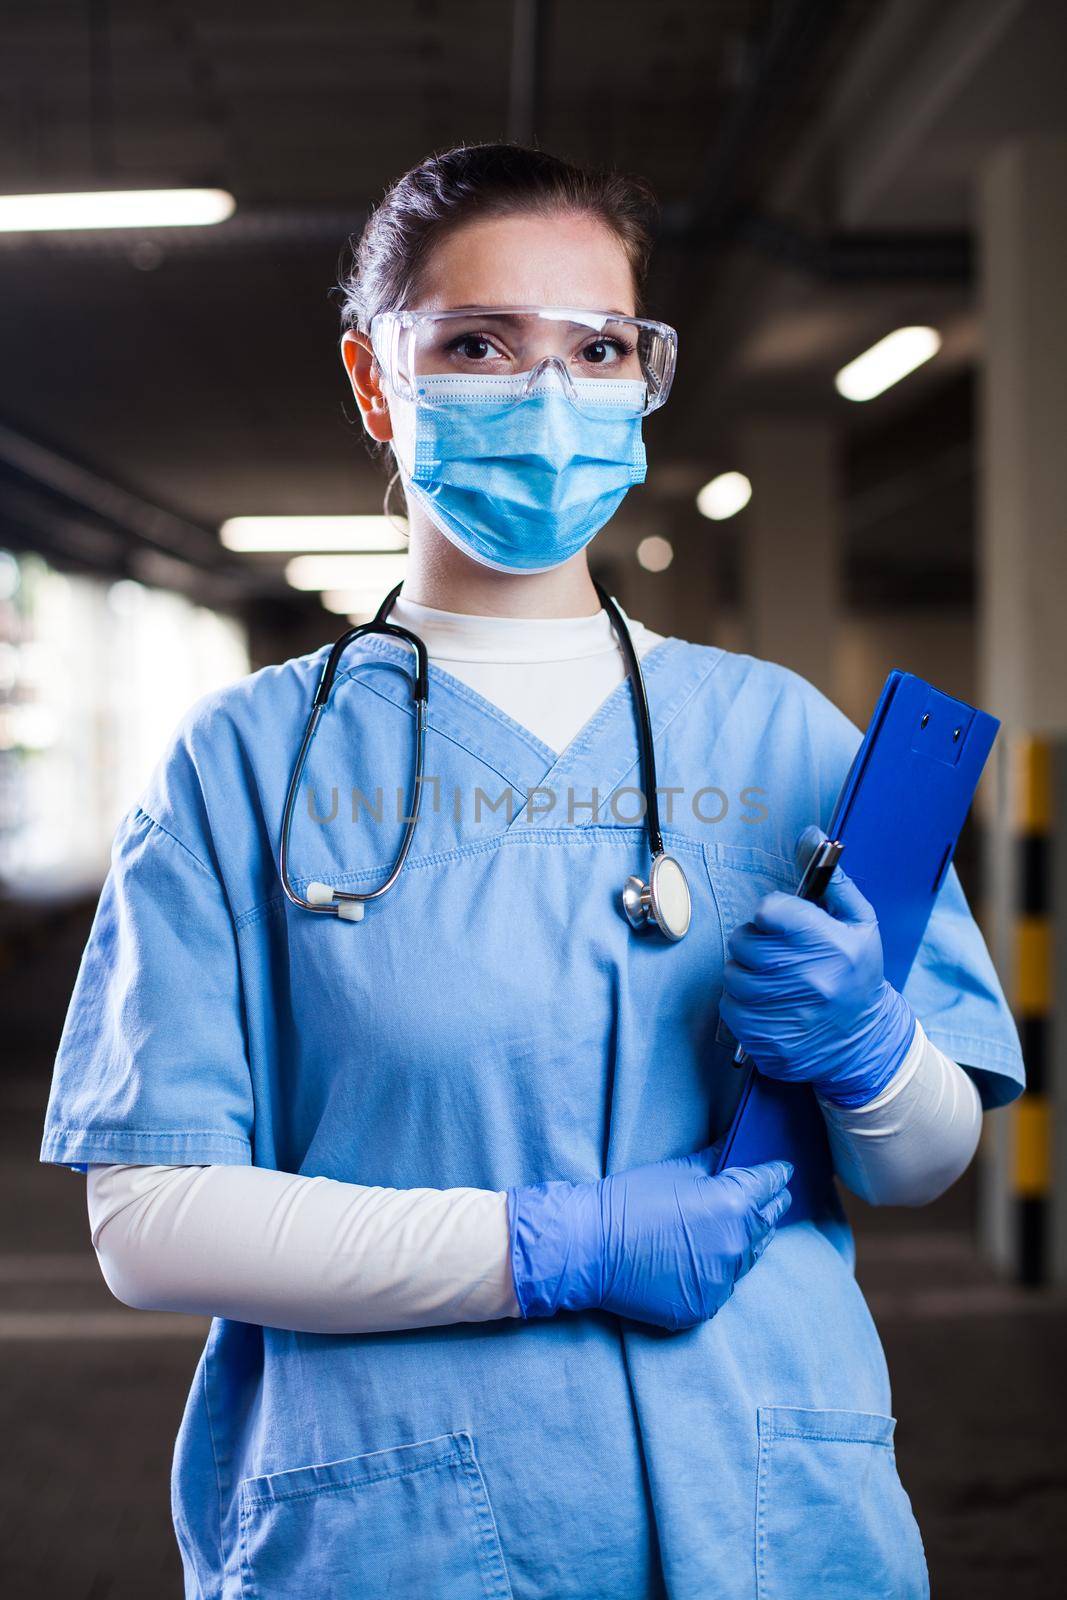 Portrait of young pretty female doctor wearing blue uniform,safety goggles & face mask,worried,overworked & stressed,UK NHS ICU medical key frontline worker fighting COVID-19 pandemic outbreak crisis